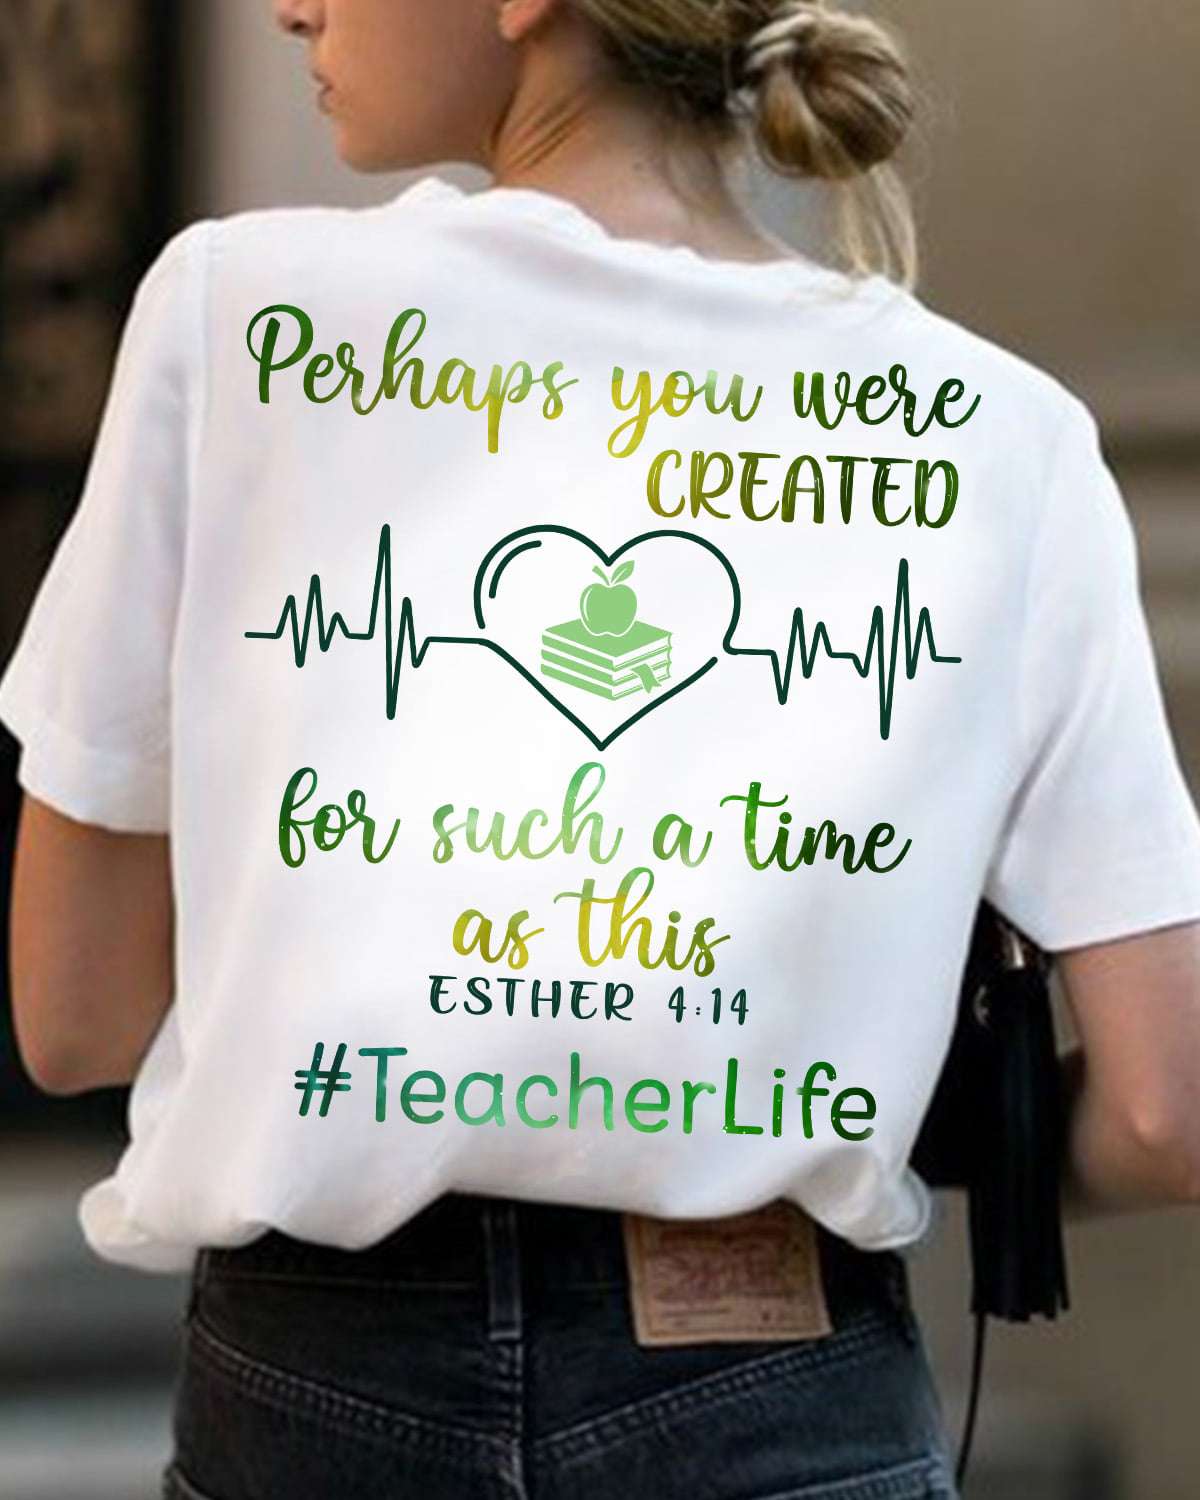 Perhaps you were created for such a time as this esther 4:14 teacher life